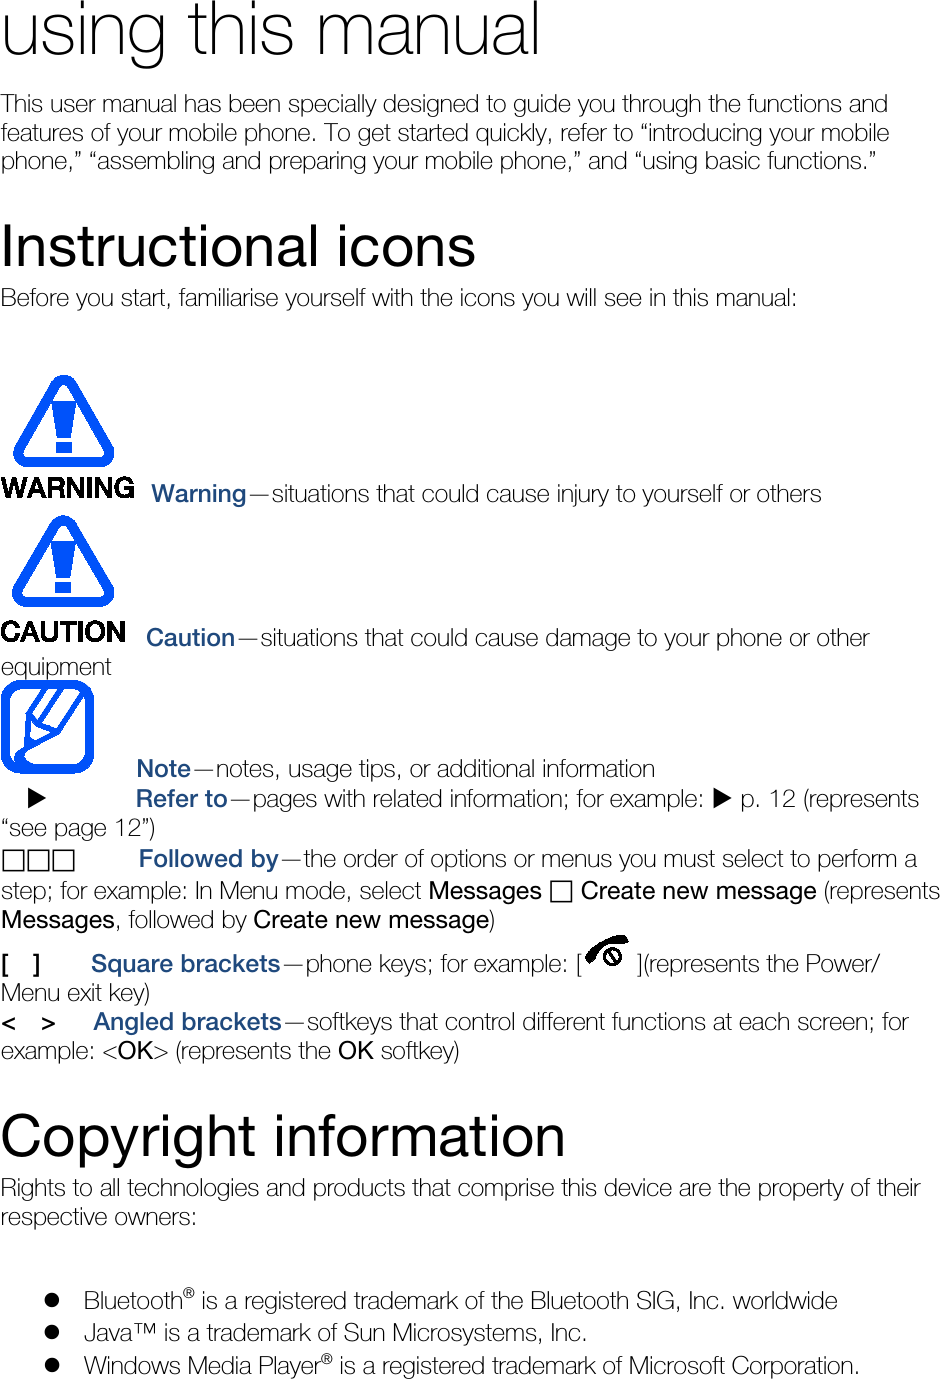 using this manual This user manual has been specially designed to guide you through the functions and features of your mobile phone. To get started quickly, refer to “introducing your mobile phone,” “assembling and preparing your mobile phone,” and “using basic functions.”  Instructional icons Before you start, familiarise yourself with the icons you will see in this manual:     Warning—situations that could cause injury to yourself or others  Caution—situations that could cause damage to your phone or other equipment    Note—notes, usage tips, or additional information          Refer to—pages with related information; for example:  p. 12 (represents “see page 12”)      Followed by—the order of options or menus you must select to perform a step; for example: In Menu mode, select Messages  Create new message (represents Messages, followed by Create new message) [  ]    Square brackets—phone keys; for example: [ ](represents the Power/ Menu exit key) &lt;  &gt;   Angled brackets—softkeys that control different functions at each screen; for example: &lt;OK&gt; (represents the OK softkey)  Copyright information Rights to all technologies and products that comprise this device are the property of their respective owners:   Bluetooth® is a registered trademark of the Bluetooth SIG, Inc. worldwide  Java™ is a trademark of Sun Microsystems, Inc.  Windows Media Player® is a registered trademark of Microsoft Corporation. 